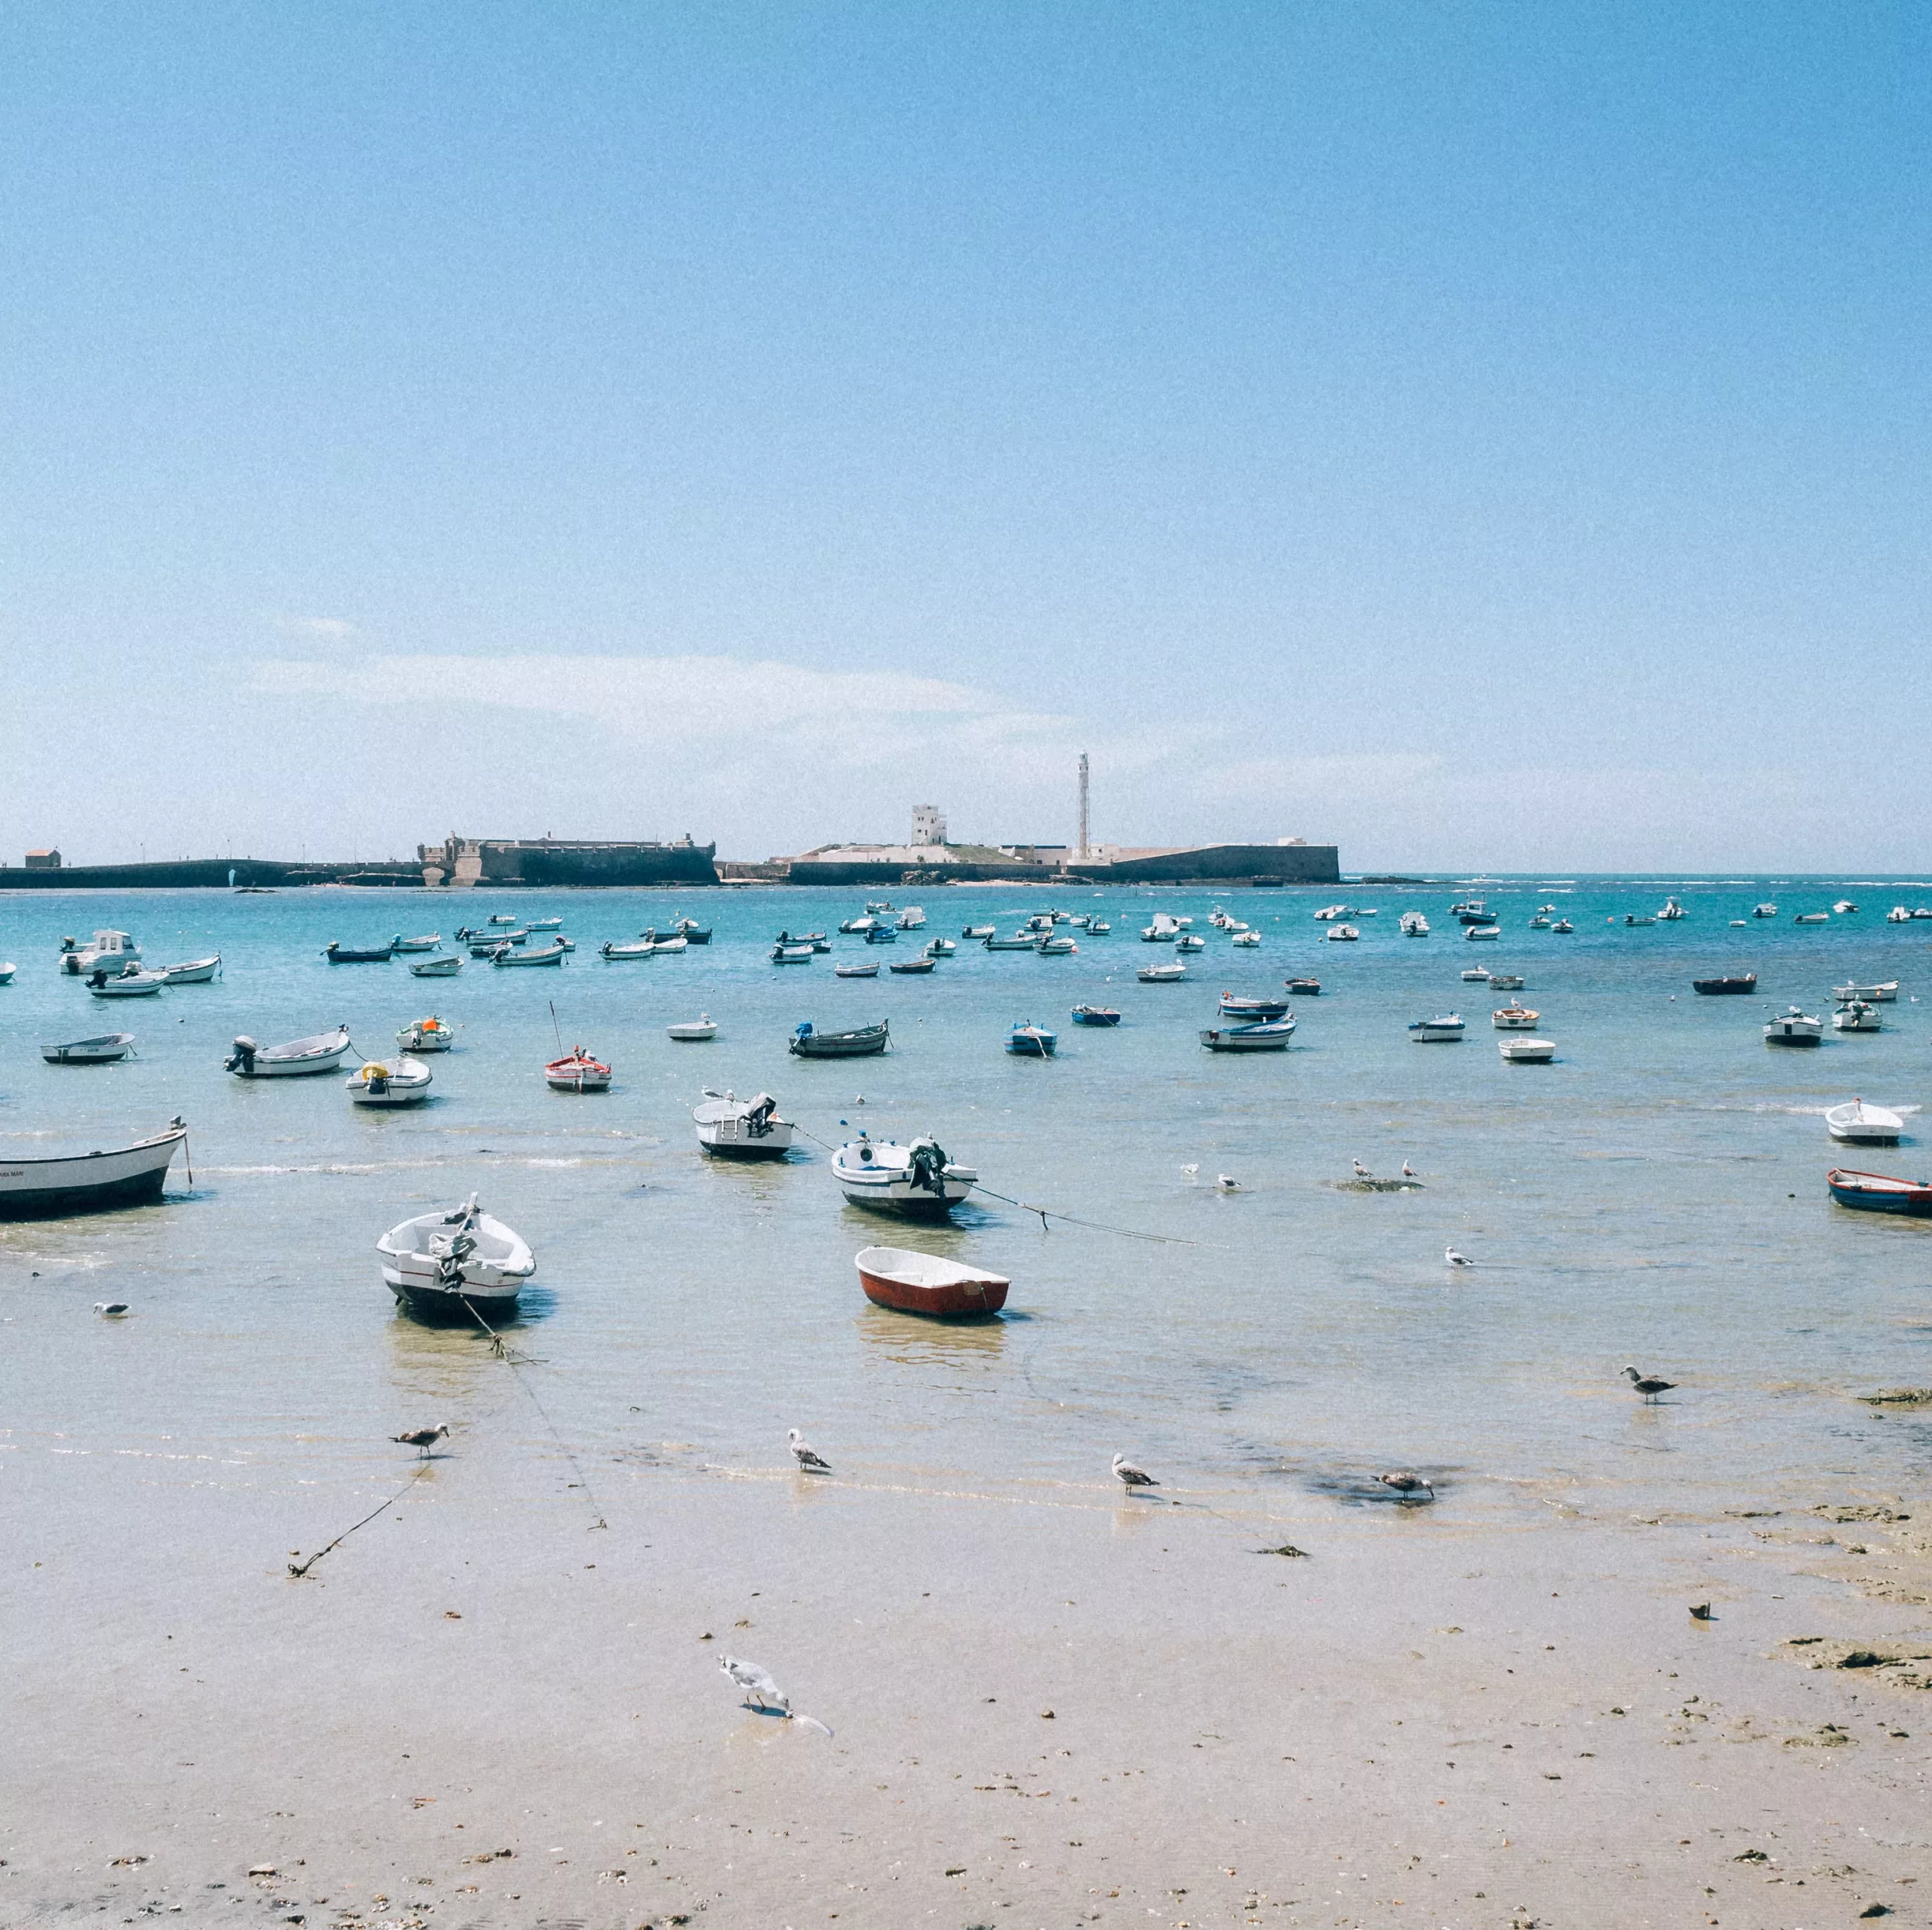 La Caleta Beach in Cadiz (Viewed on a day trip from seville)